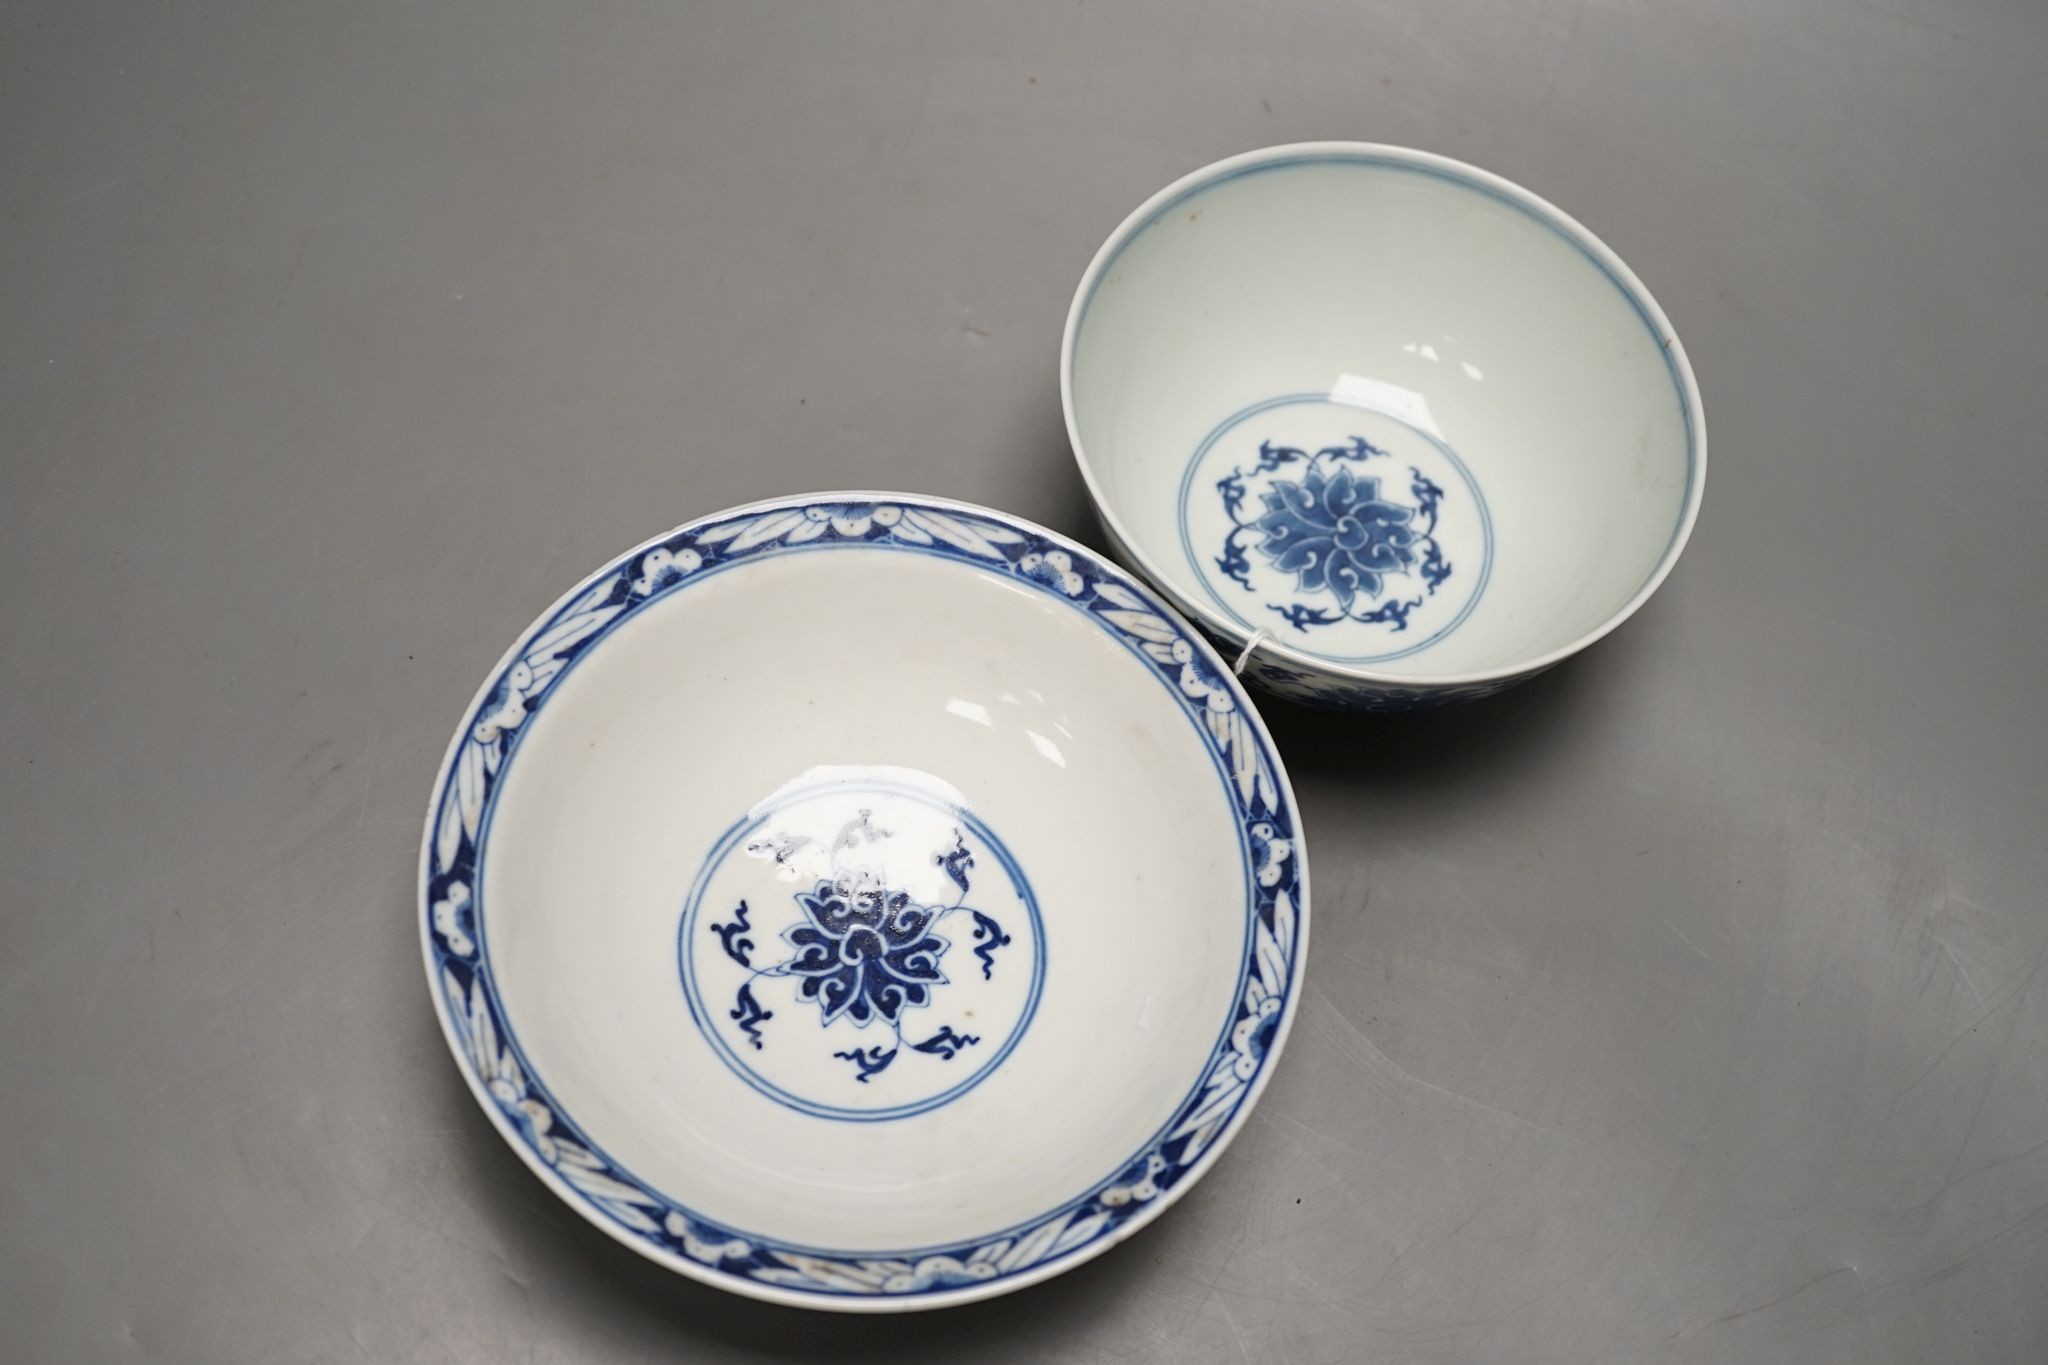 Two Chinese porcelain bowls, painted in underglaze blue, largest 17cm